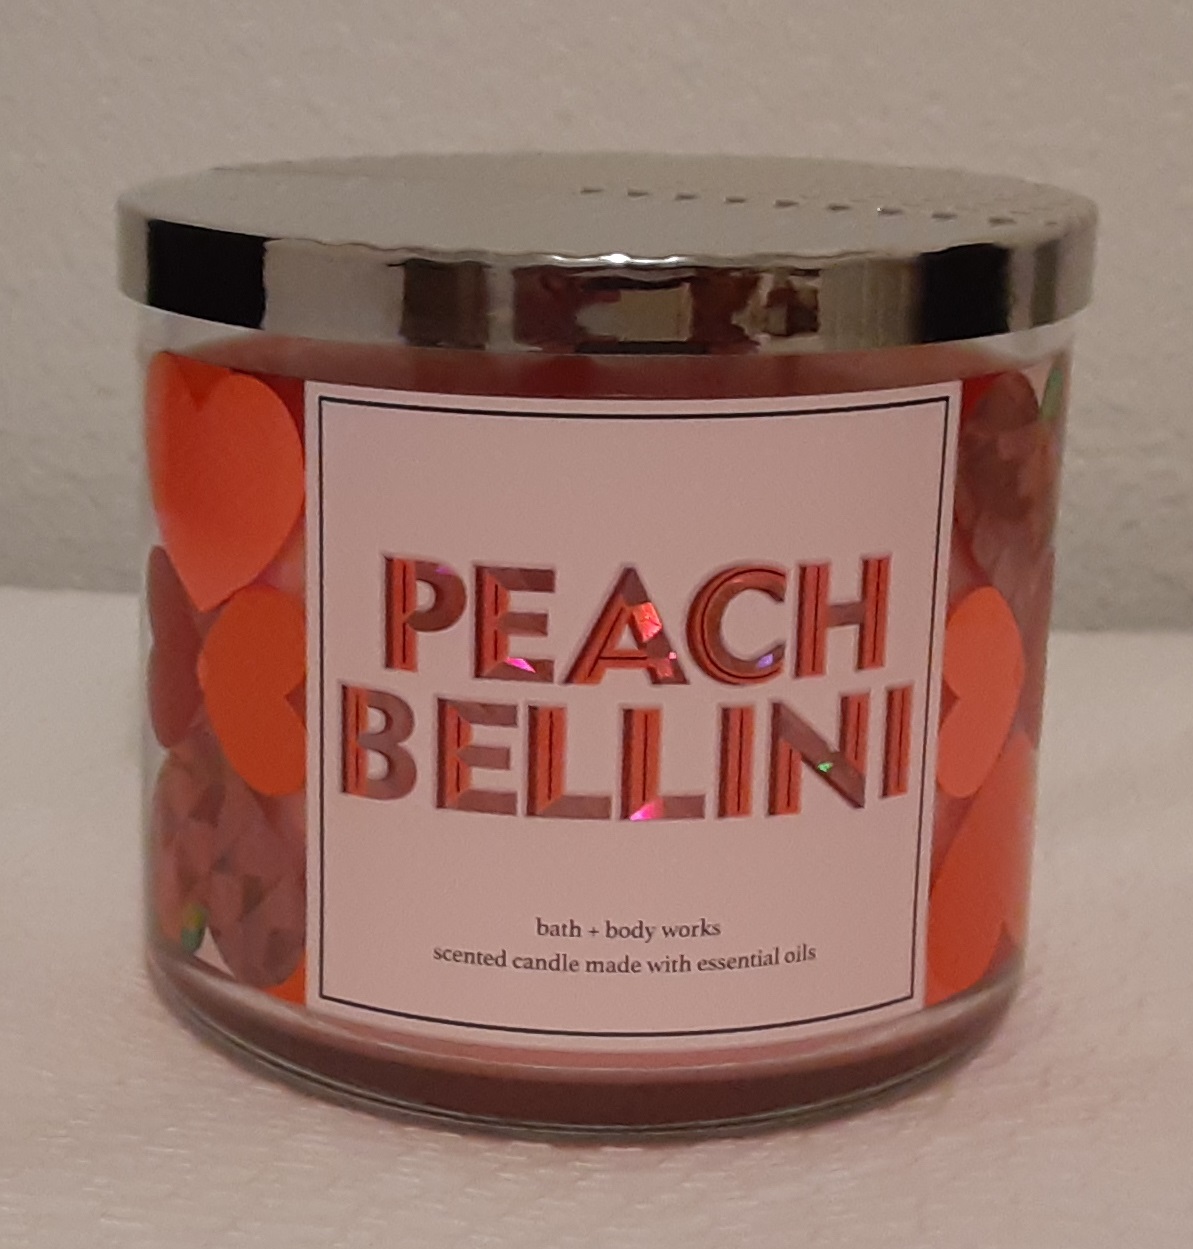 Peach Bellini scented candle - 3 wick candle - bath & body works